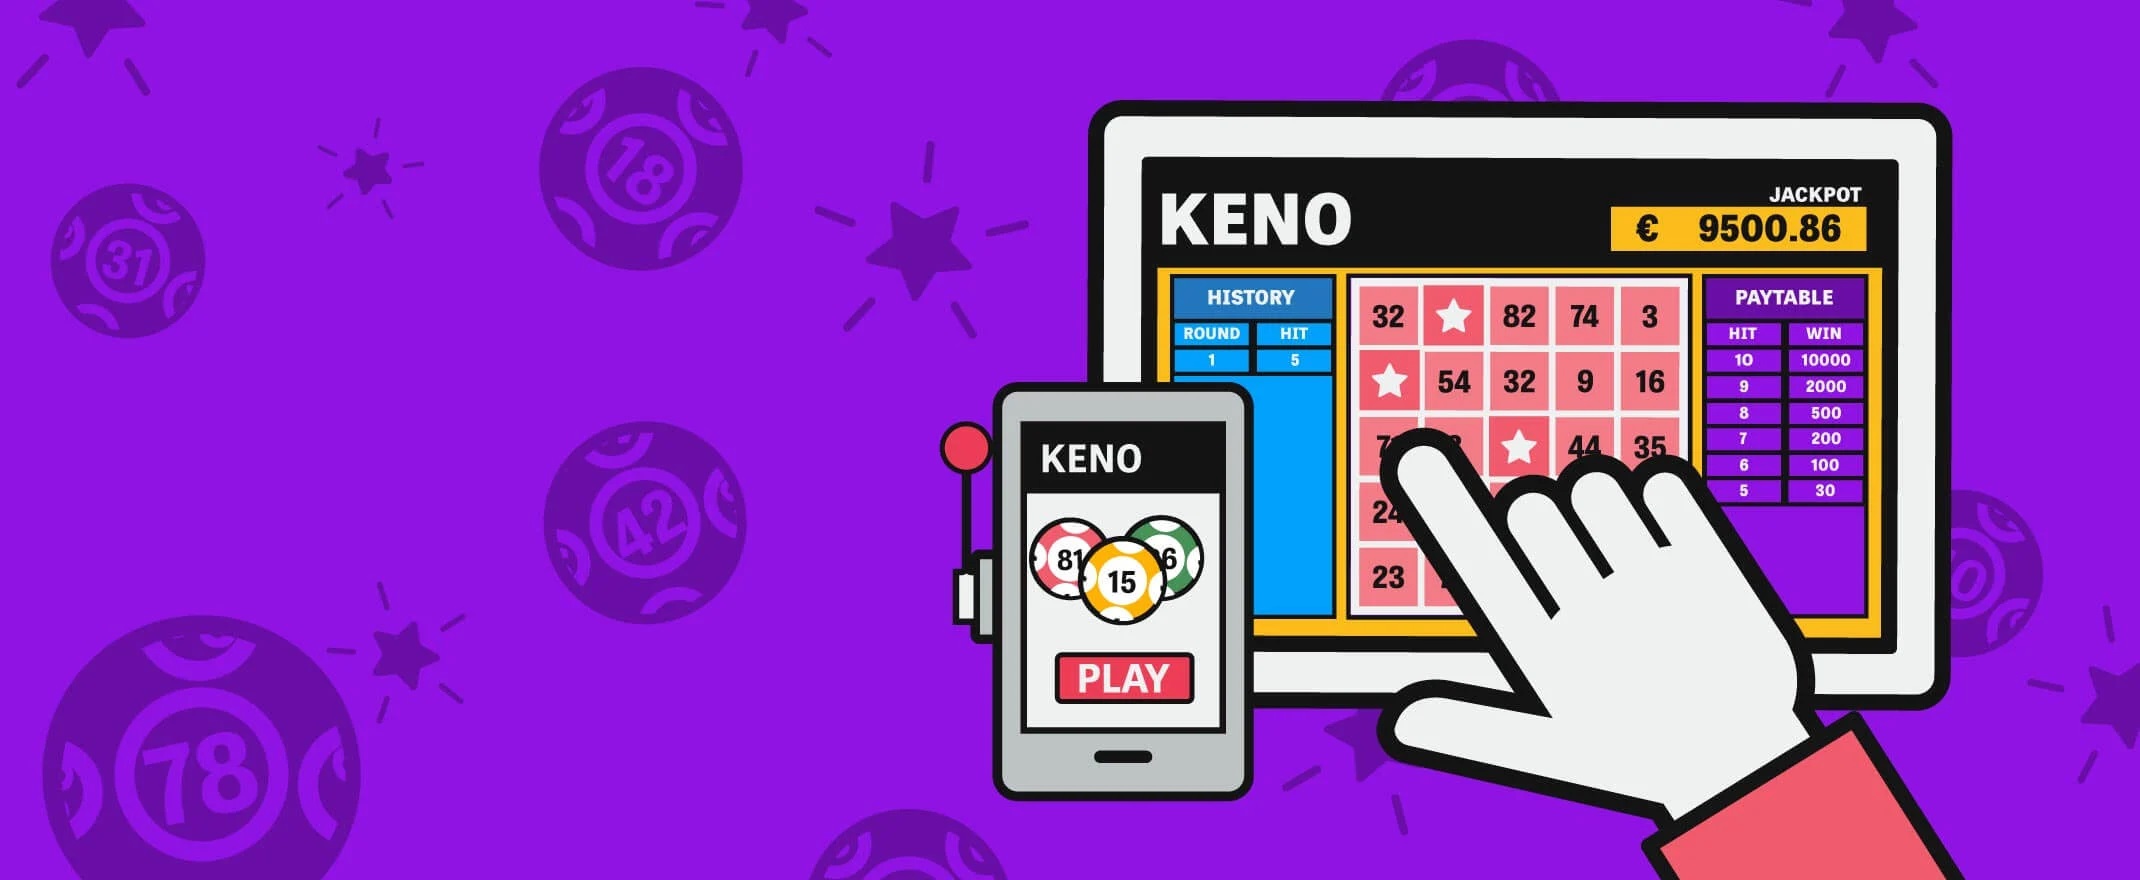 How to win in Keno: What do you need to know?